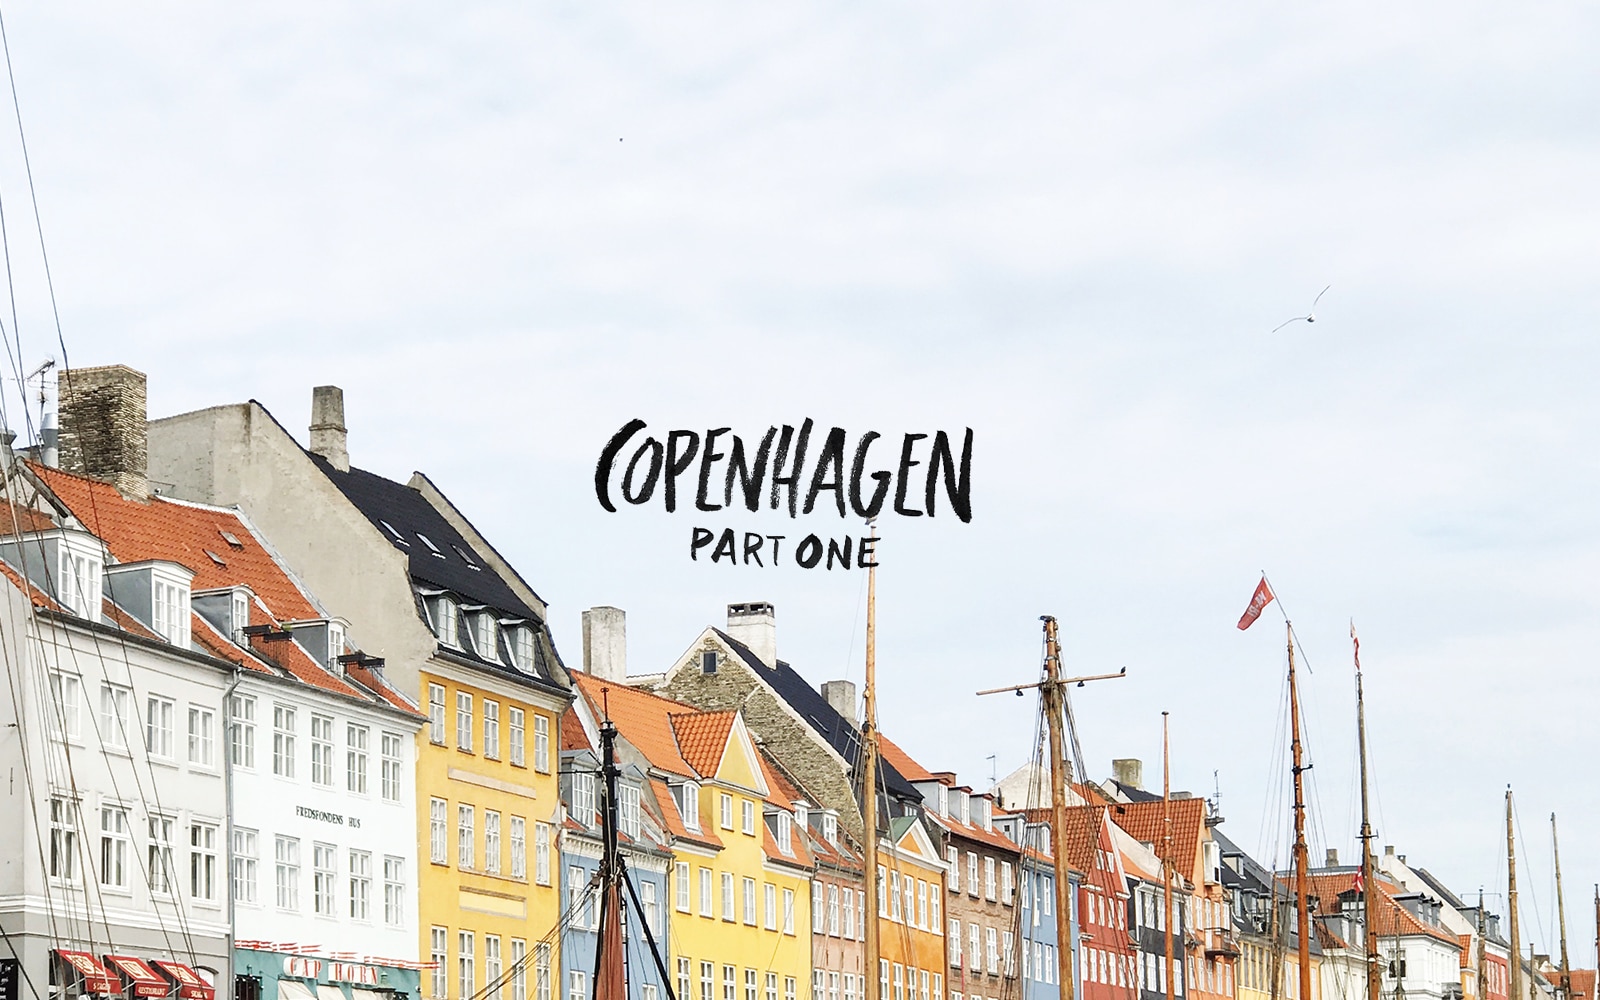 Our trip to Copenhagen, Part One is up and we share about what it was like traveling with a toddler around Denmark. More on The Fresh Exchange.